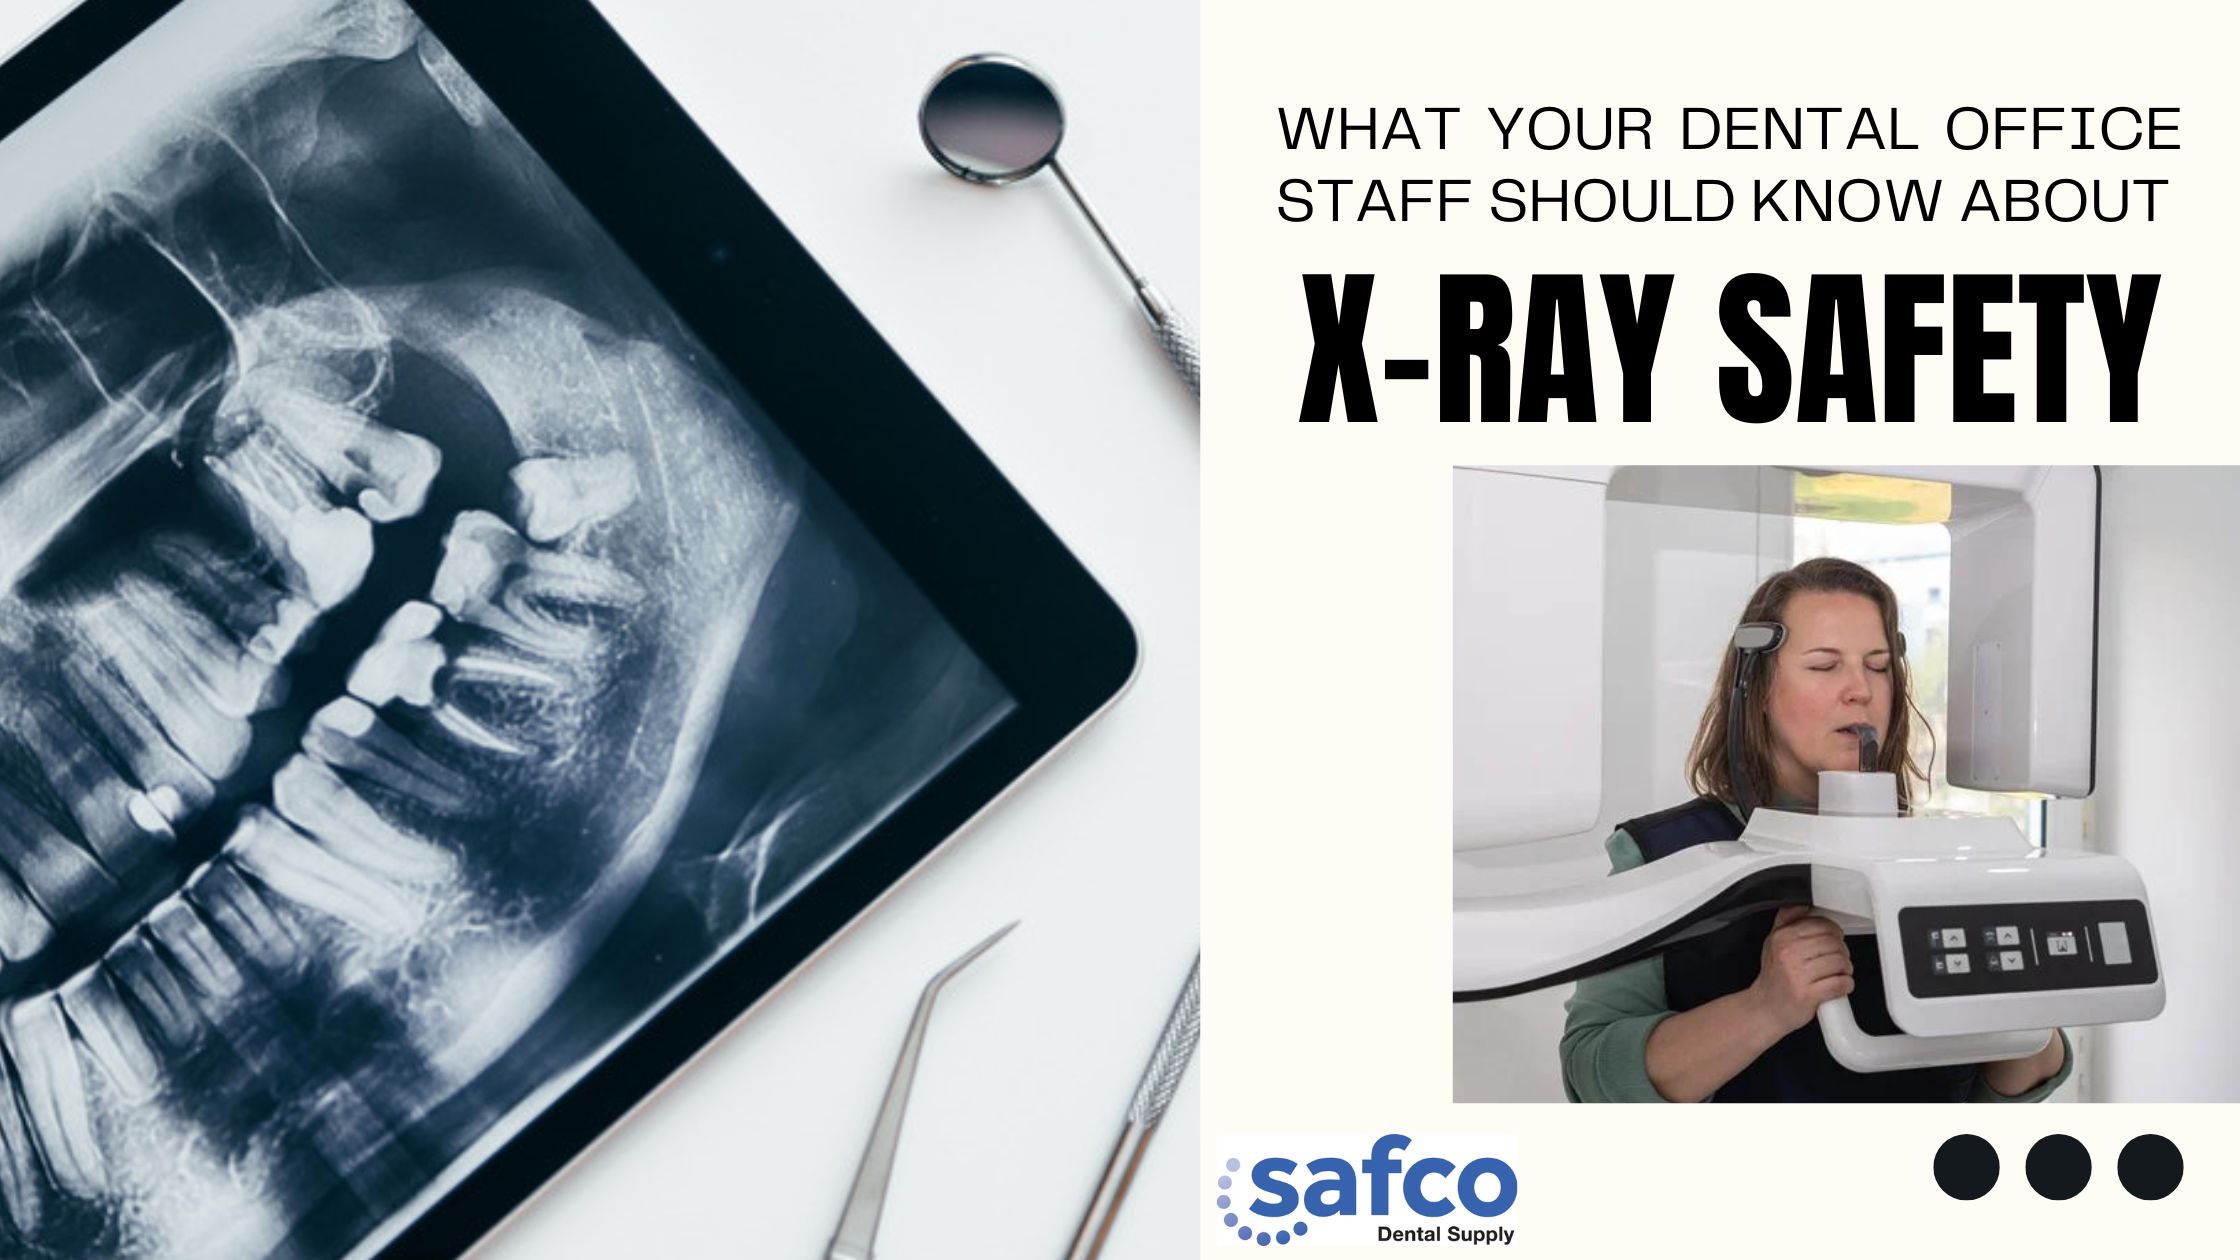 What Your Dental Office Staff Should Know About X-Ray Safety